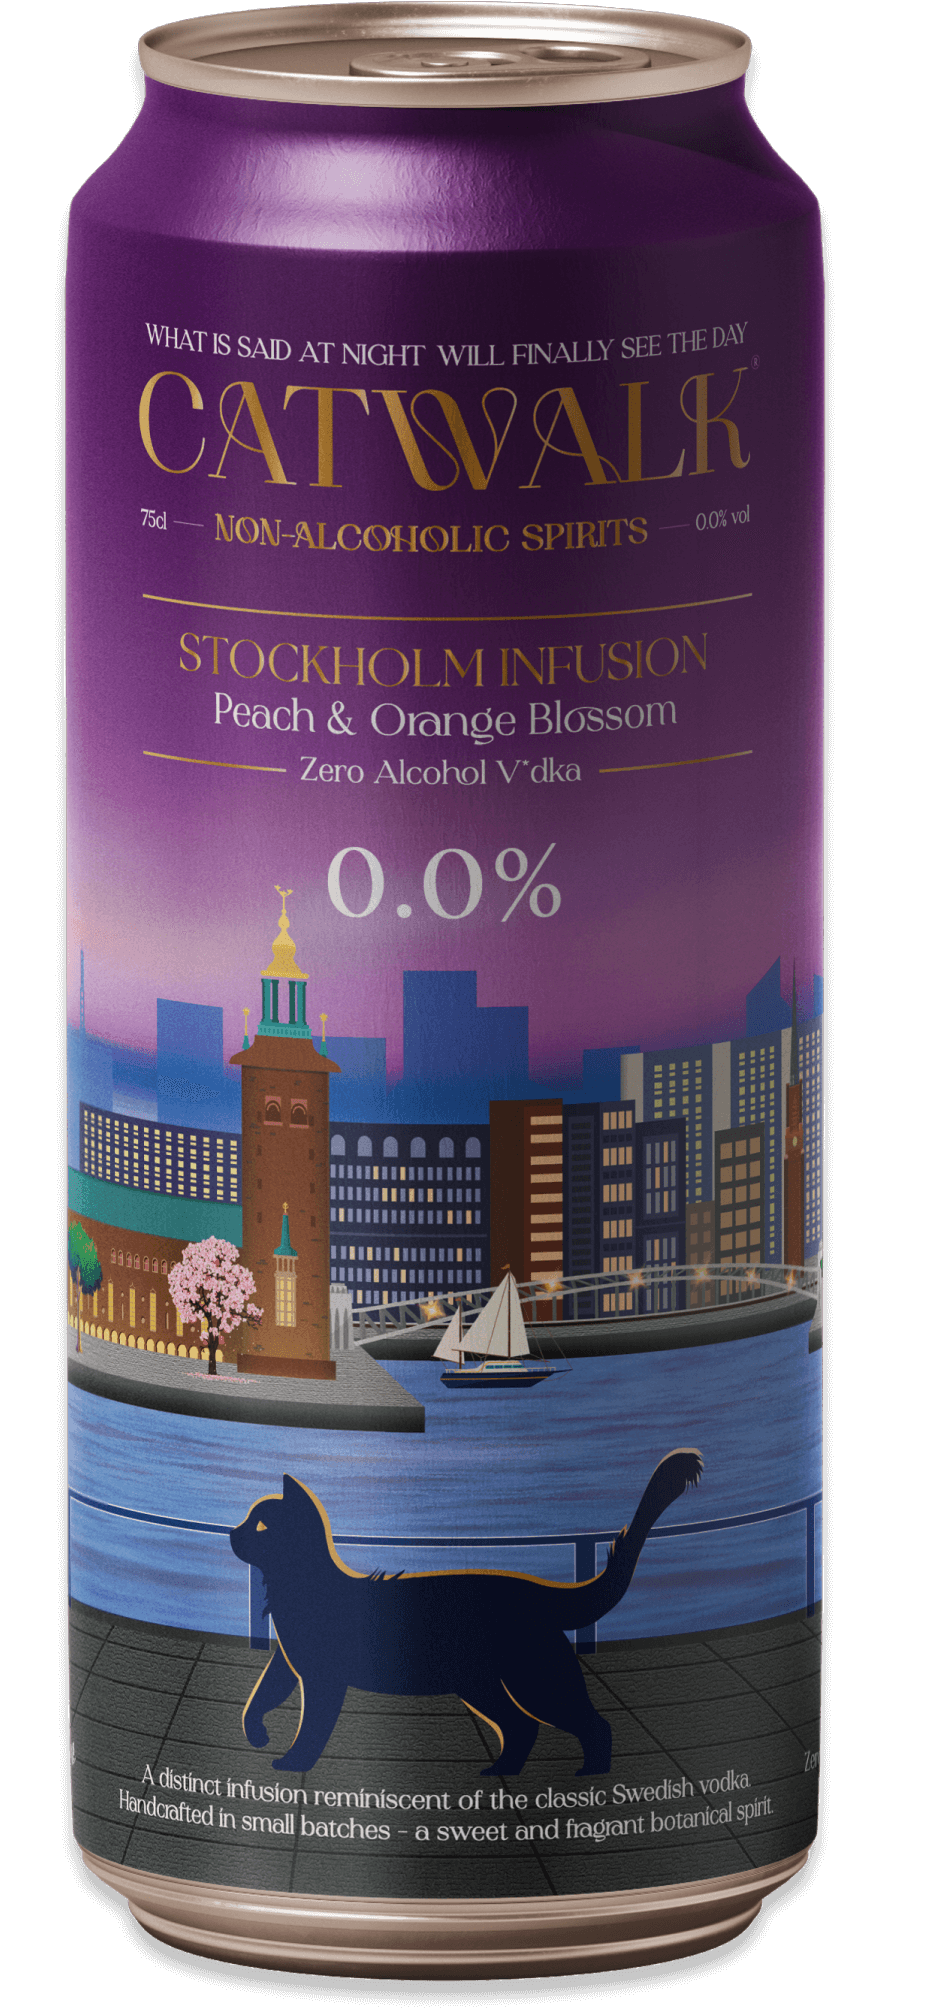 STOCKHOLM INFUSION